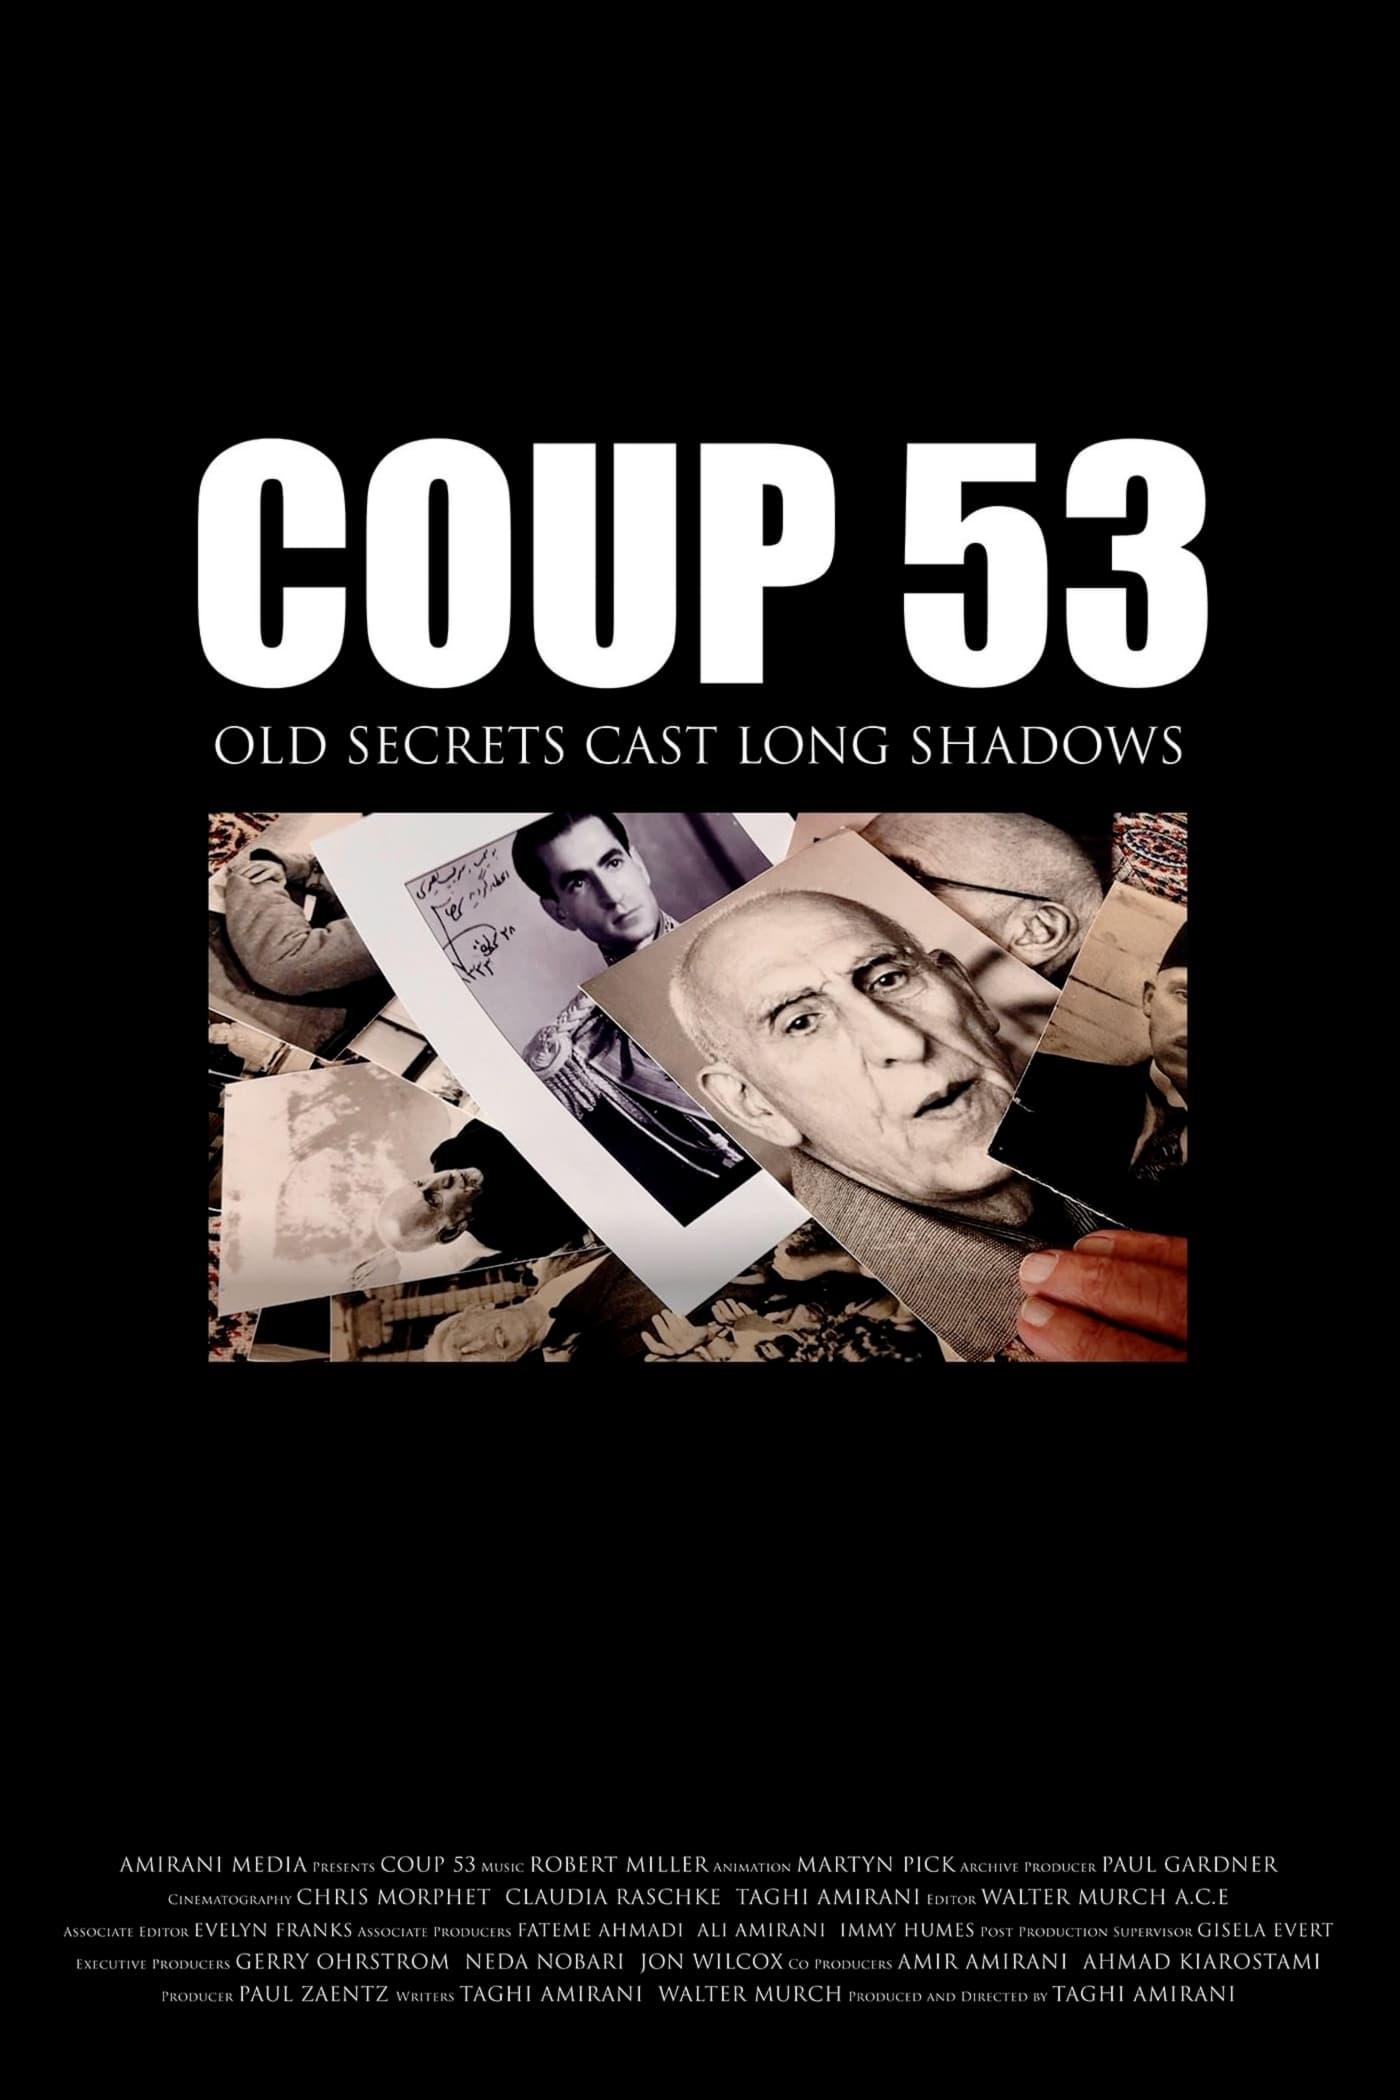 Coup 53 poster